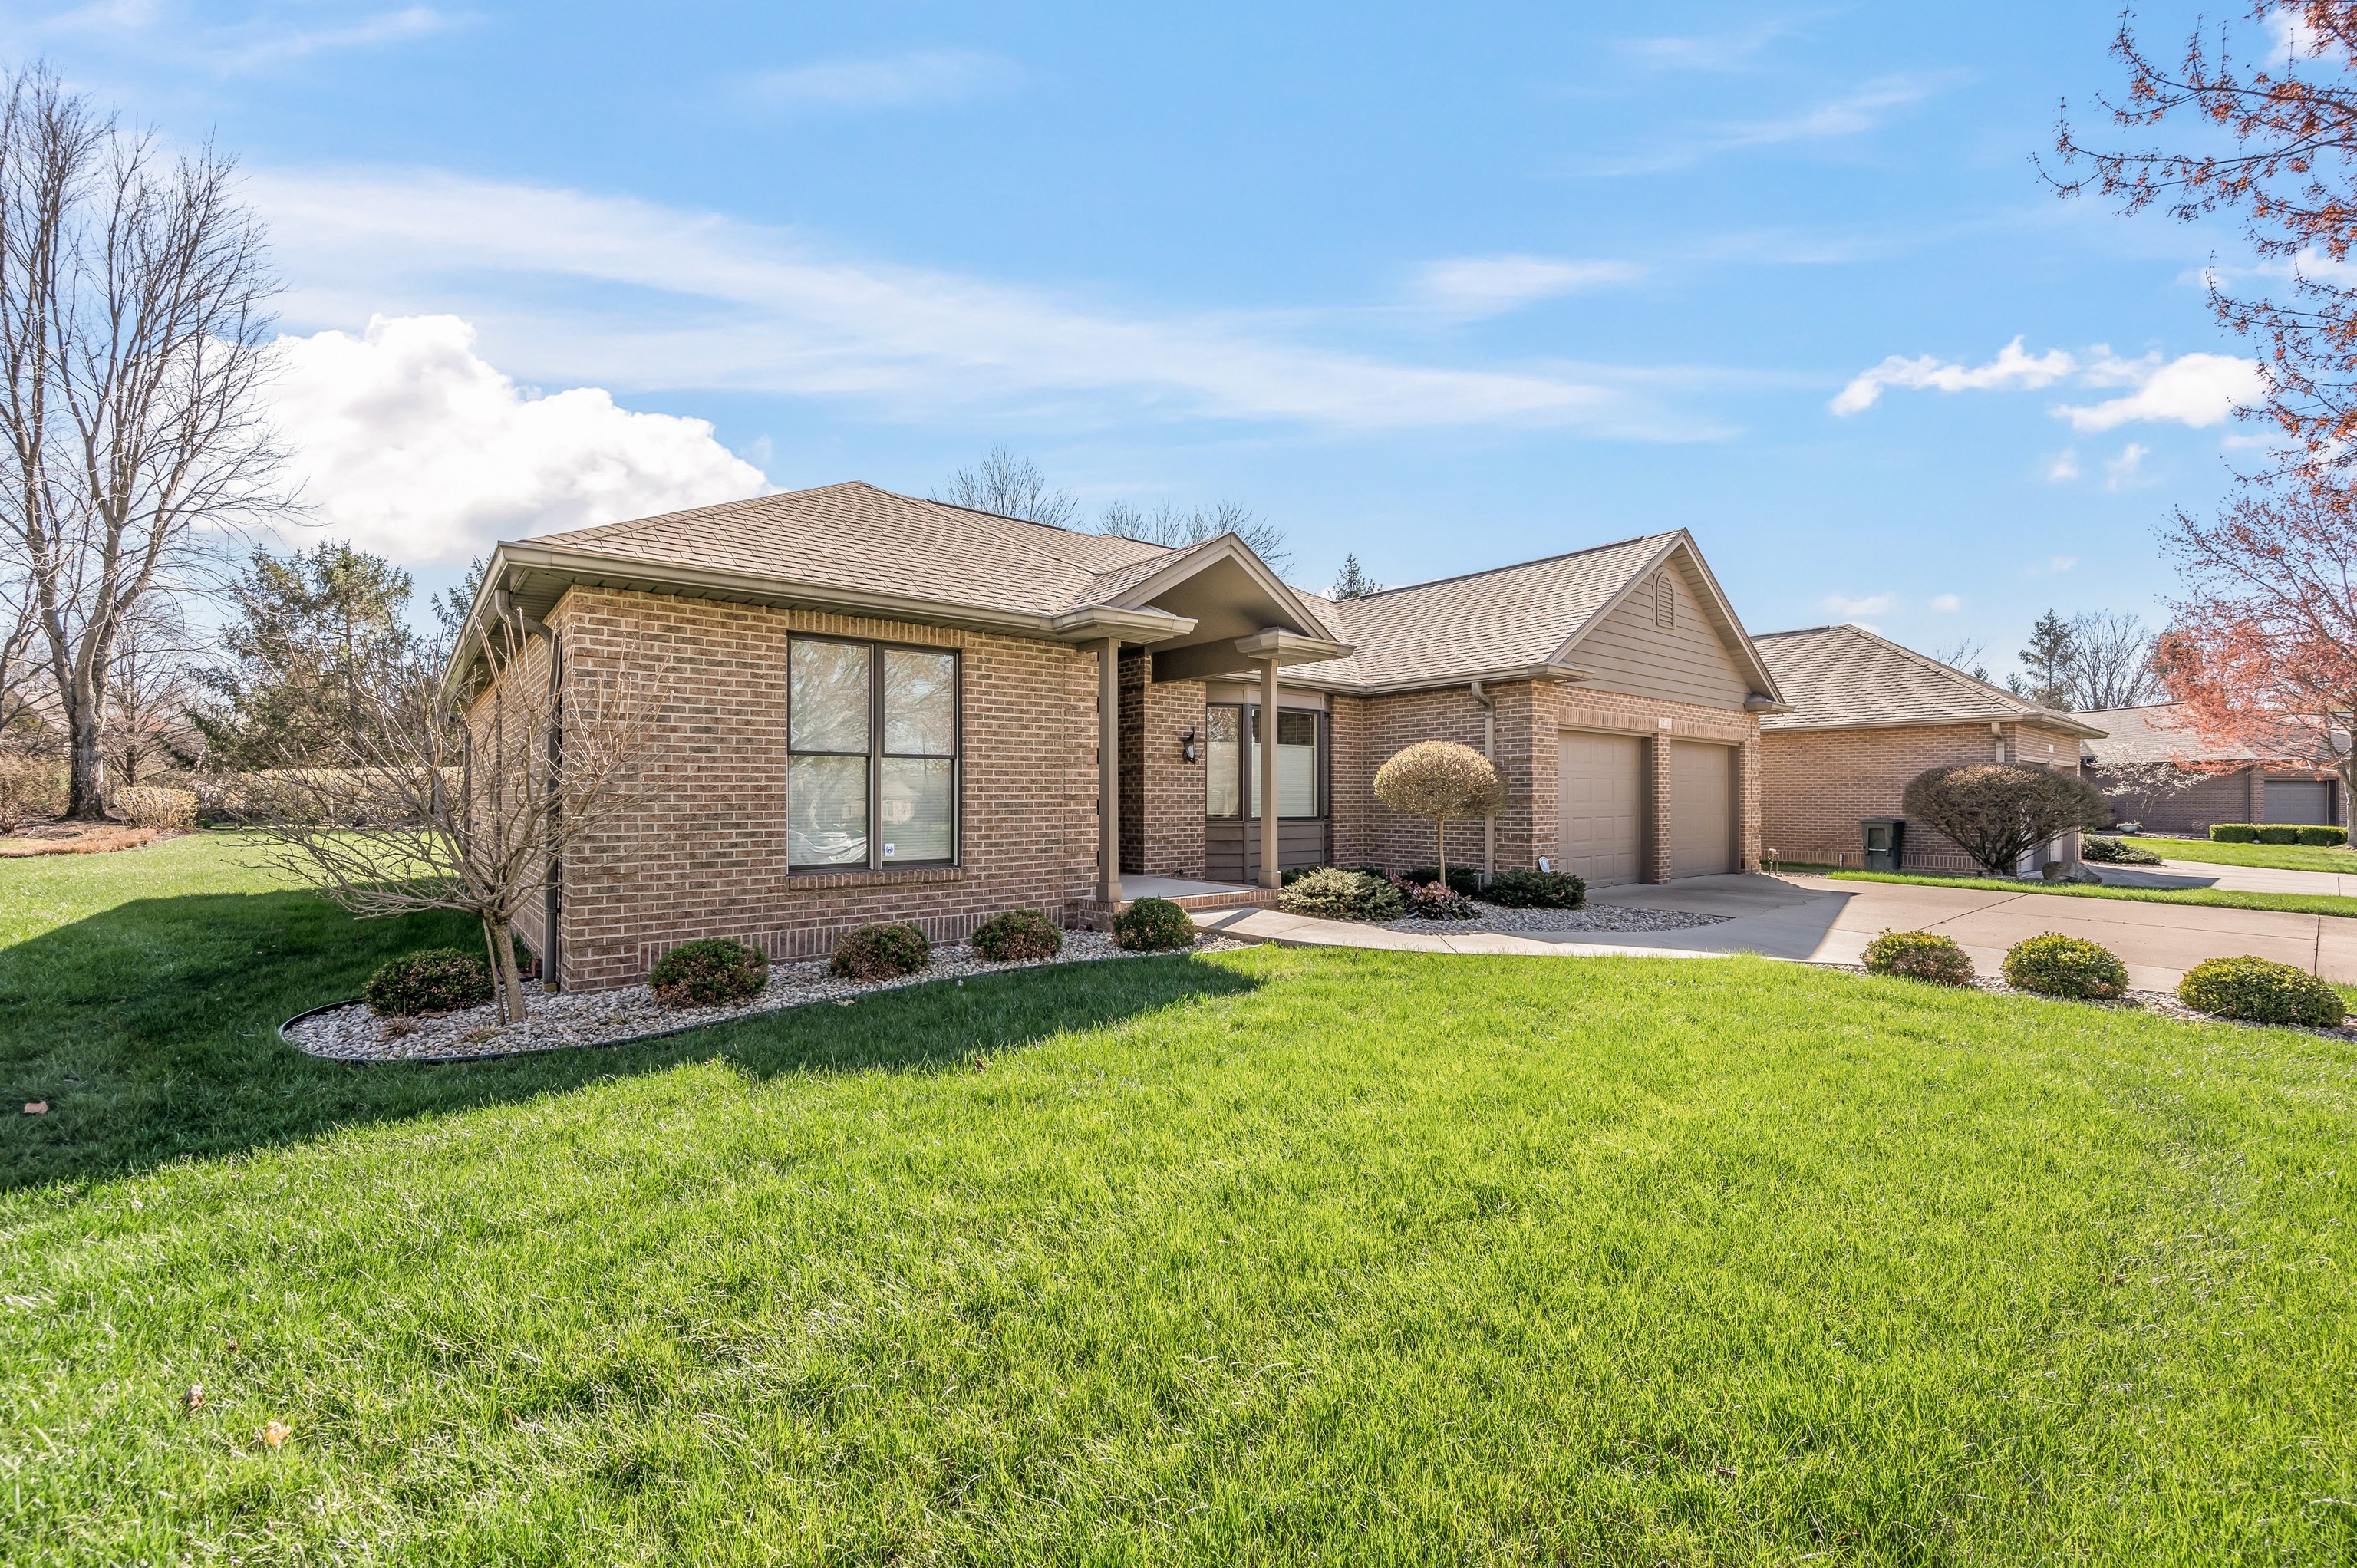 4. 1250 Pintail Court